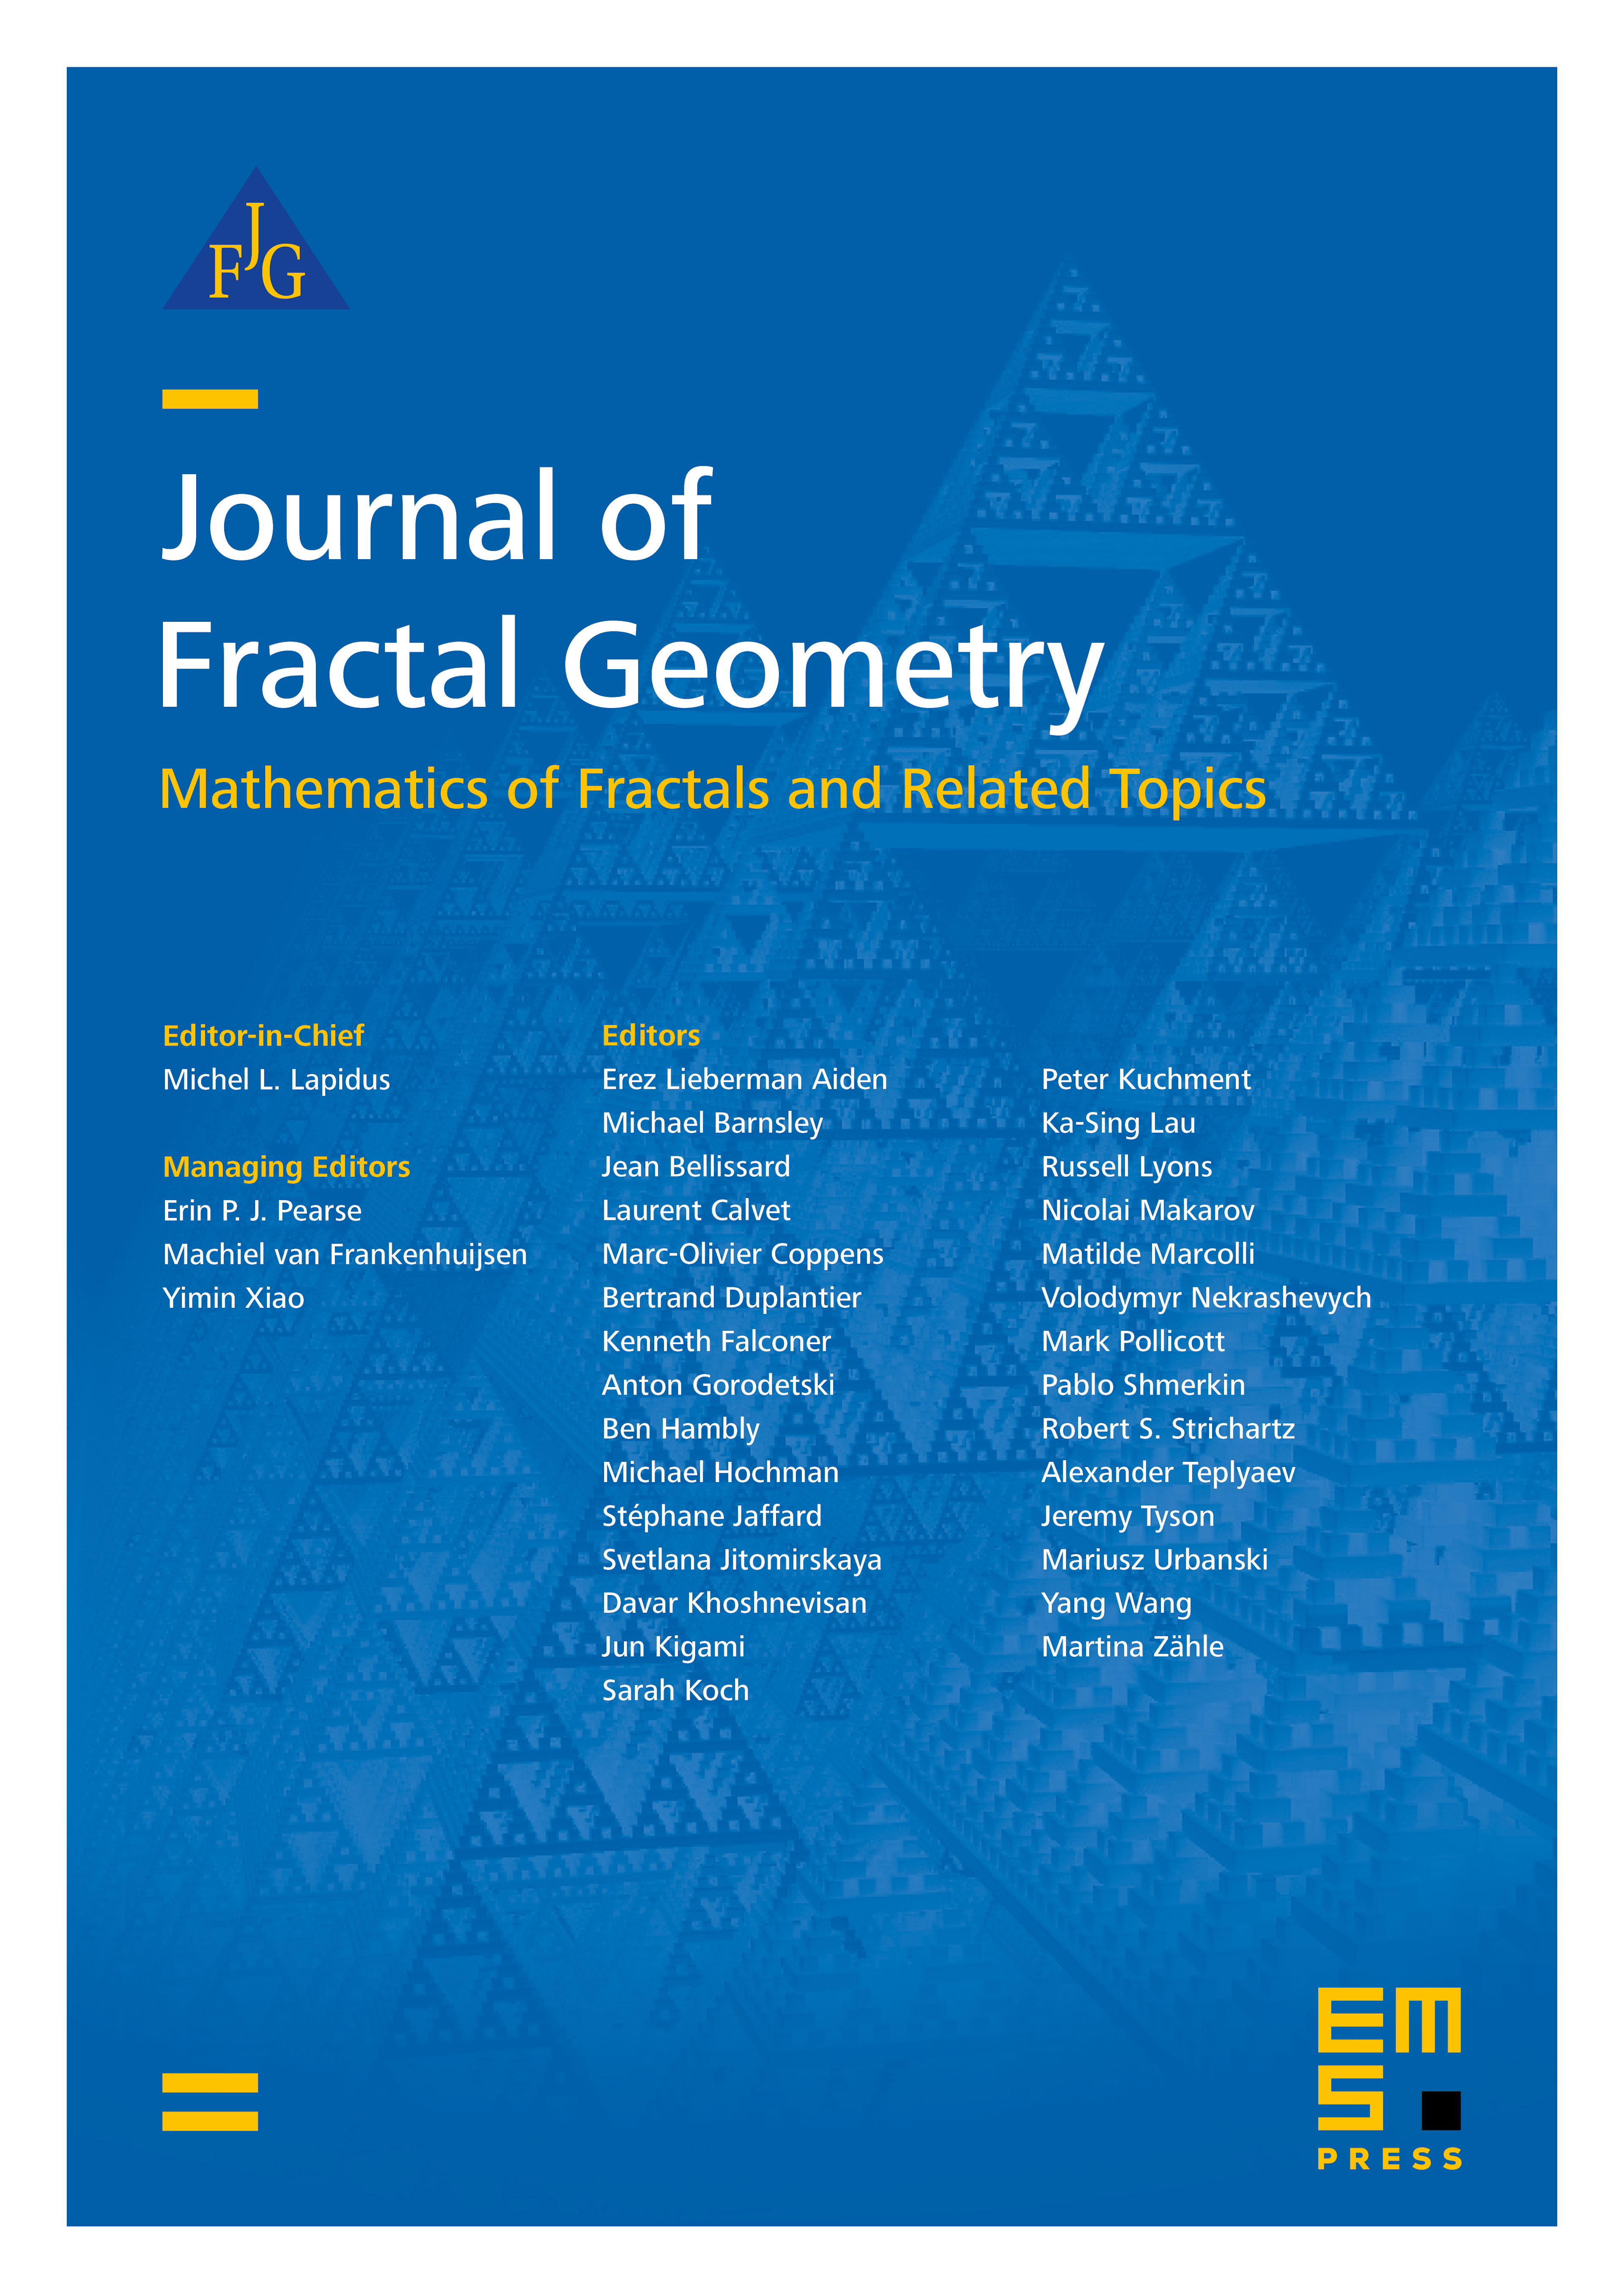 Assouad dimension influences the box and packing dimensions of orthogonal projections cover